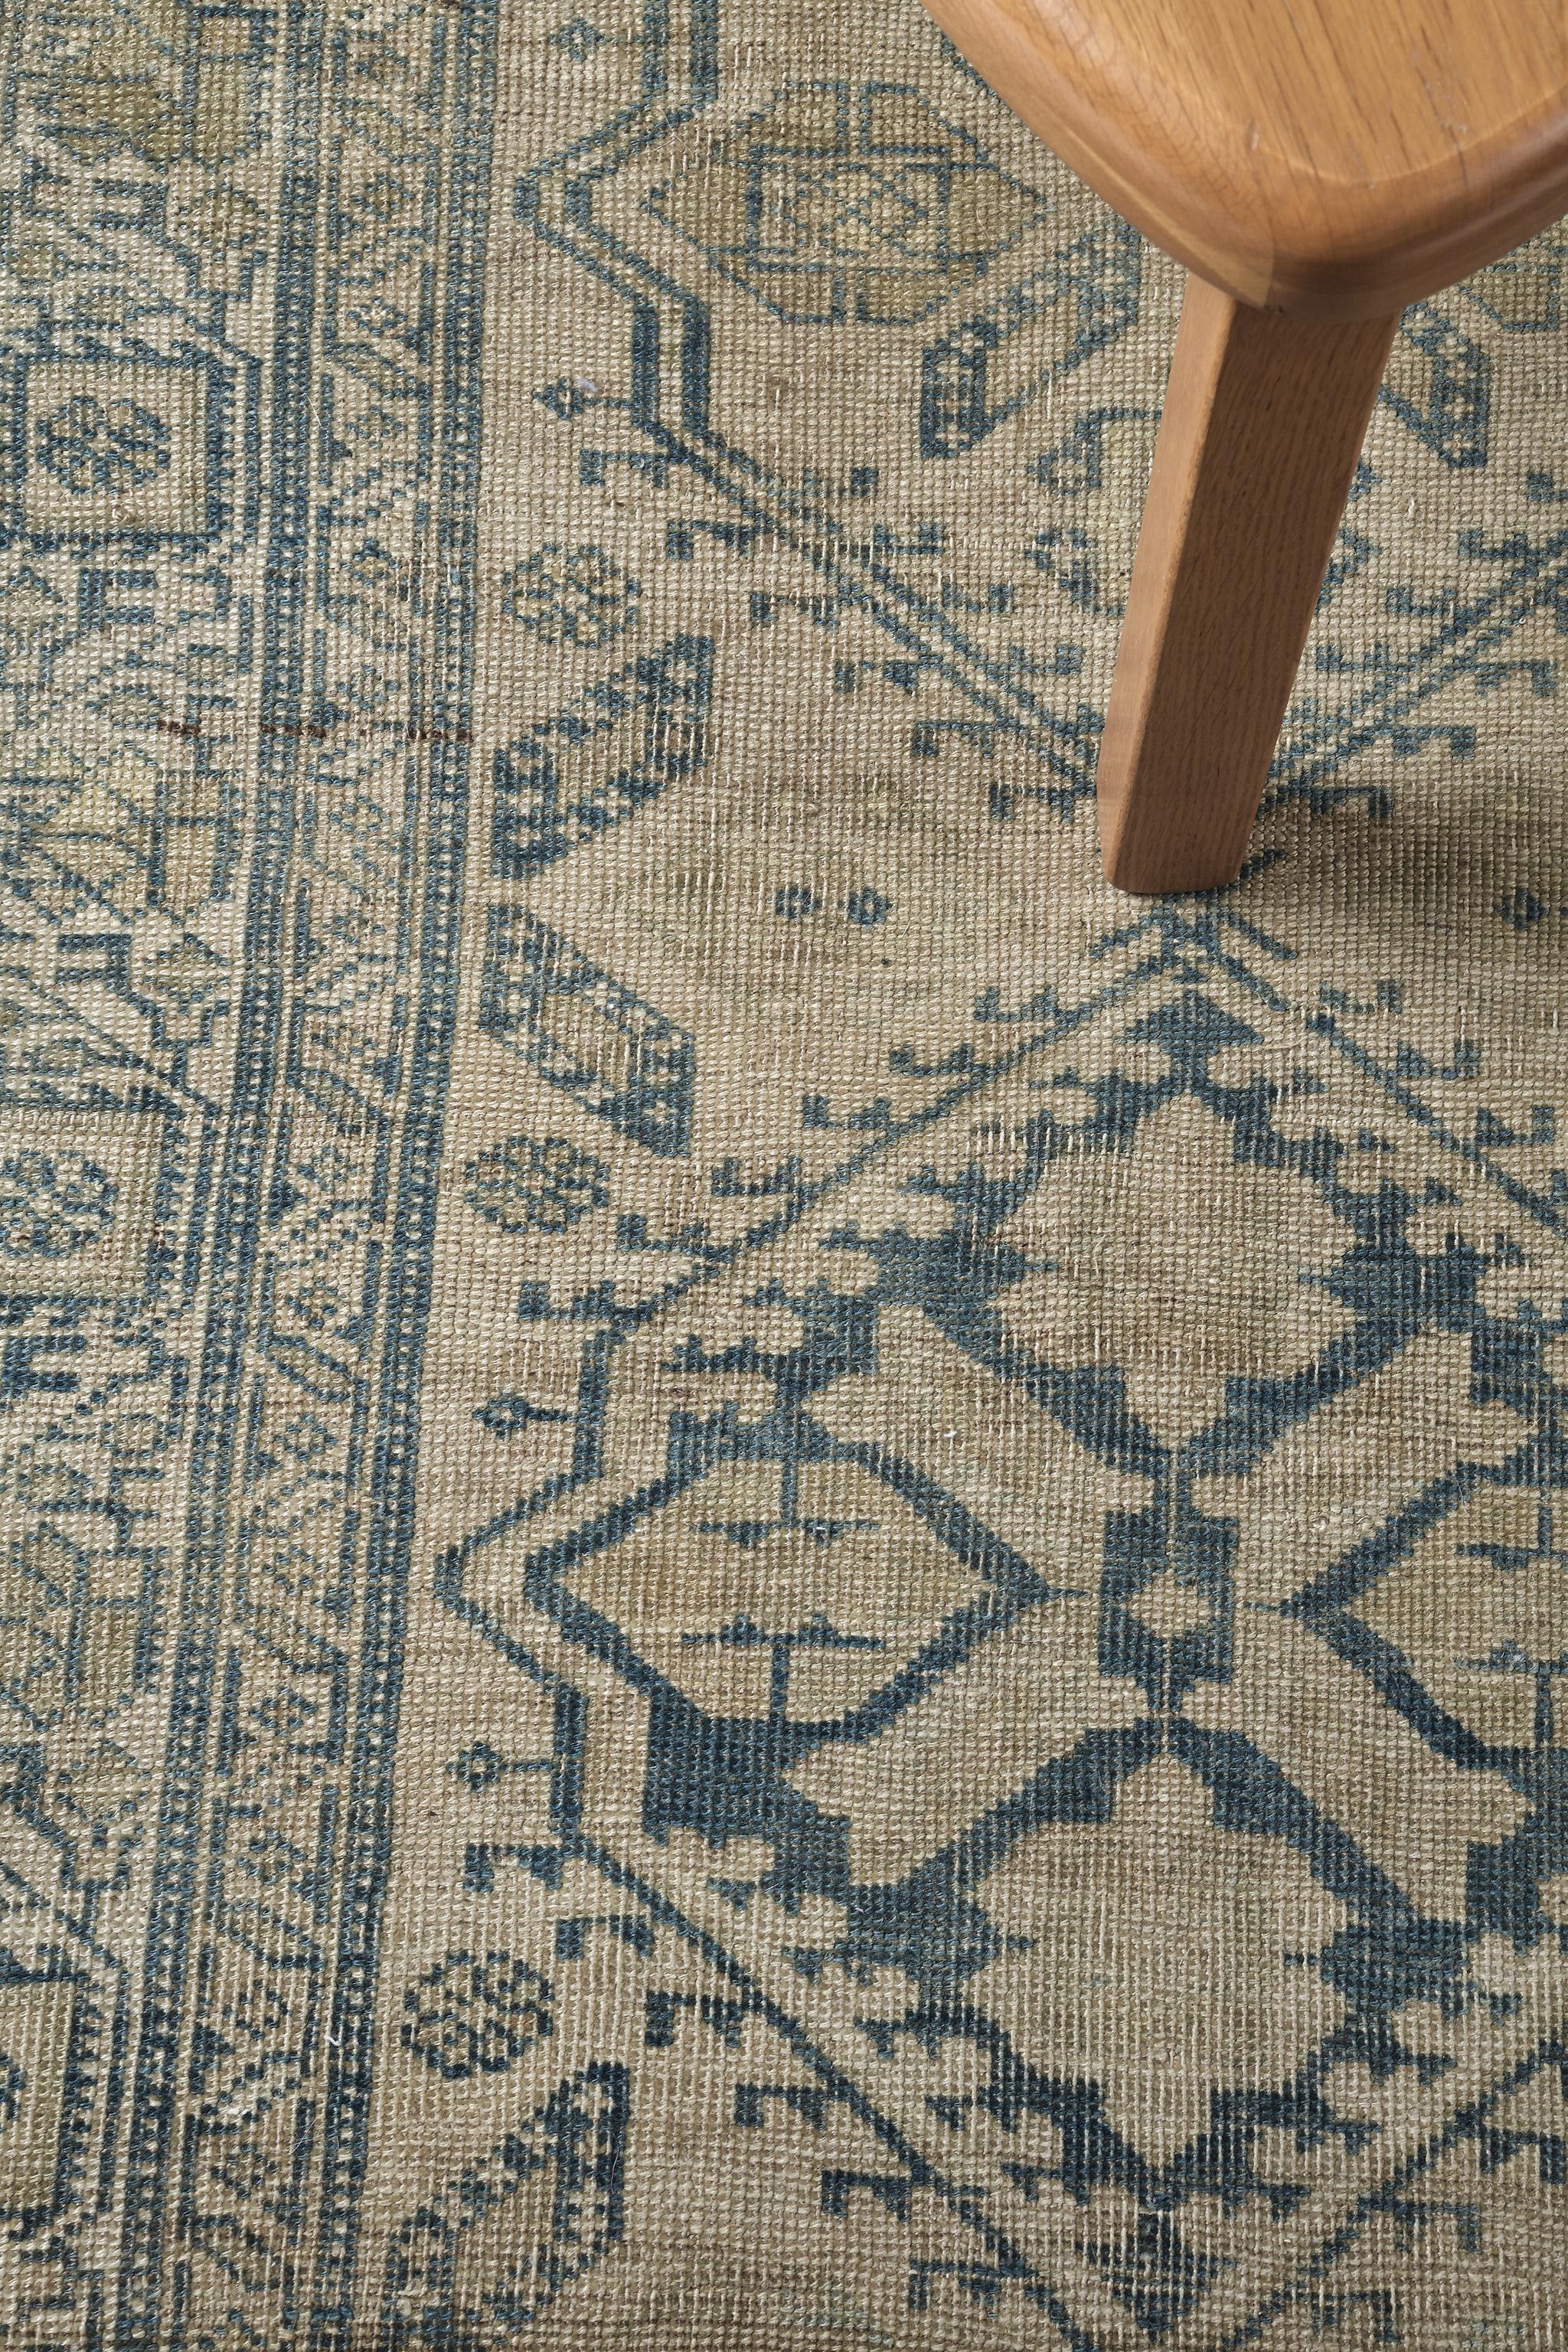 Wool Antique Persian Sarab Runner 30190 For Sale